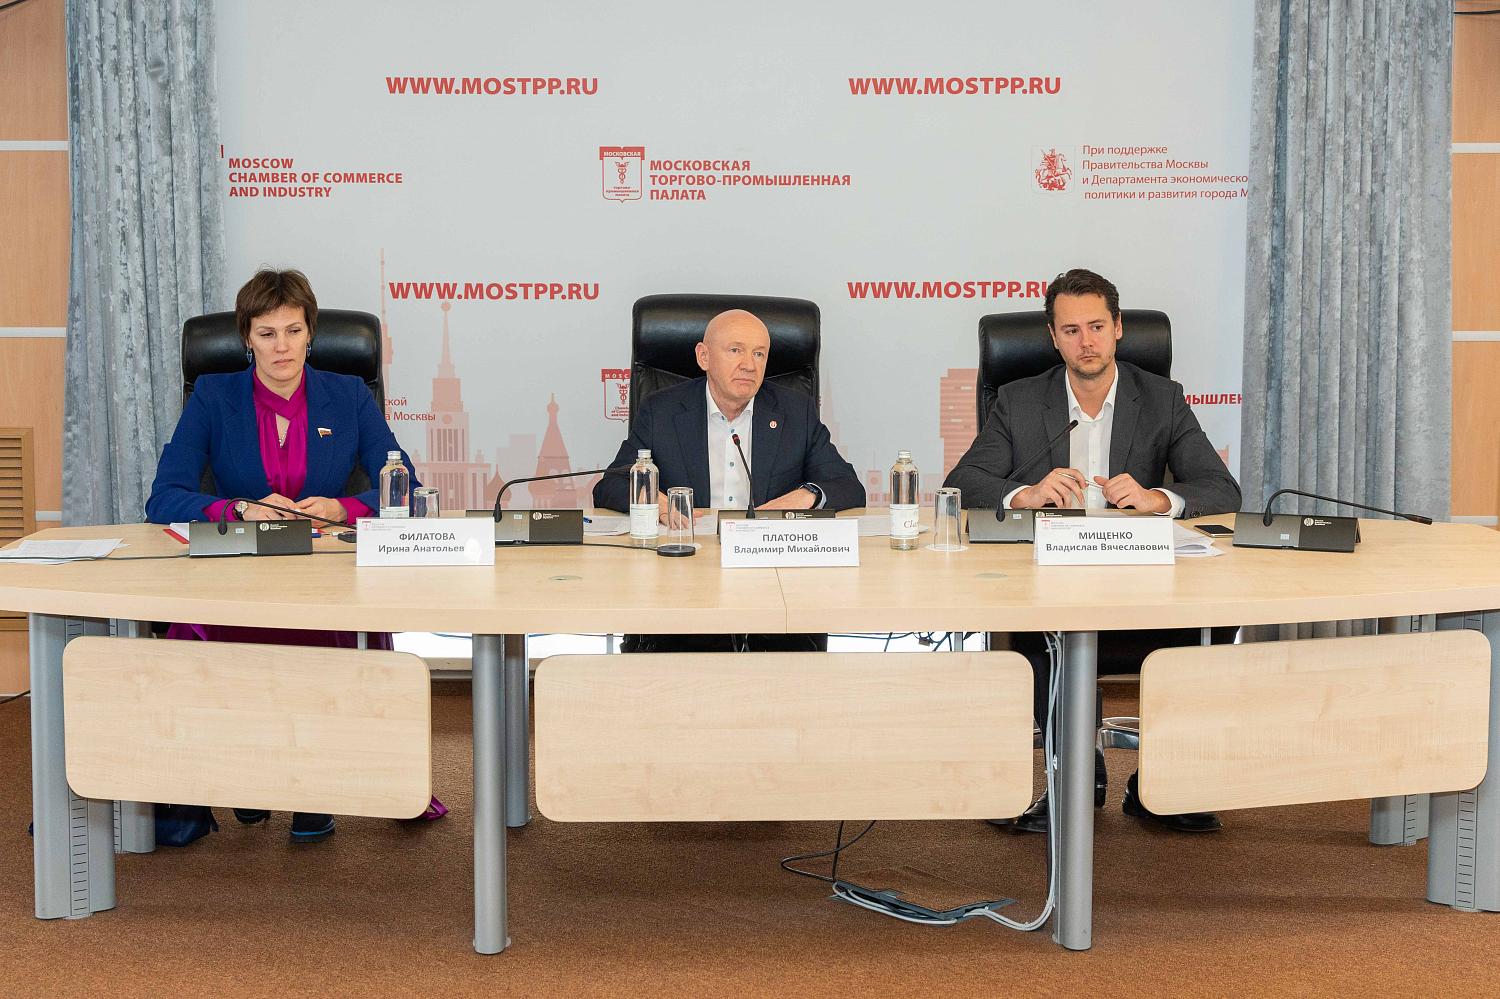 Entrepreneurs of the medical industry received information on the peculiarities of foreign economic activity in modern conditions